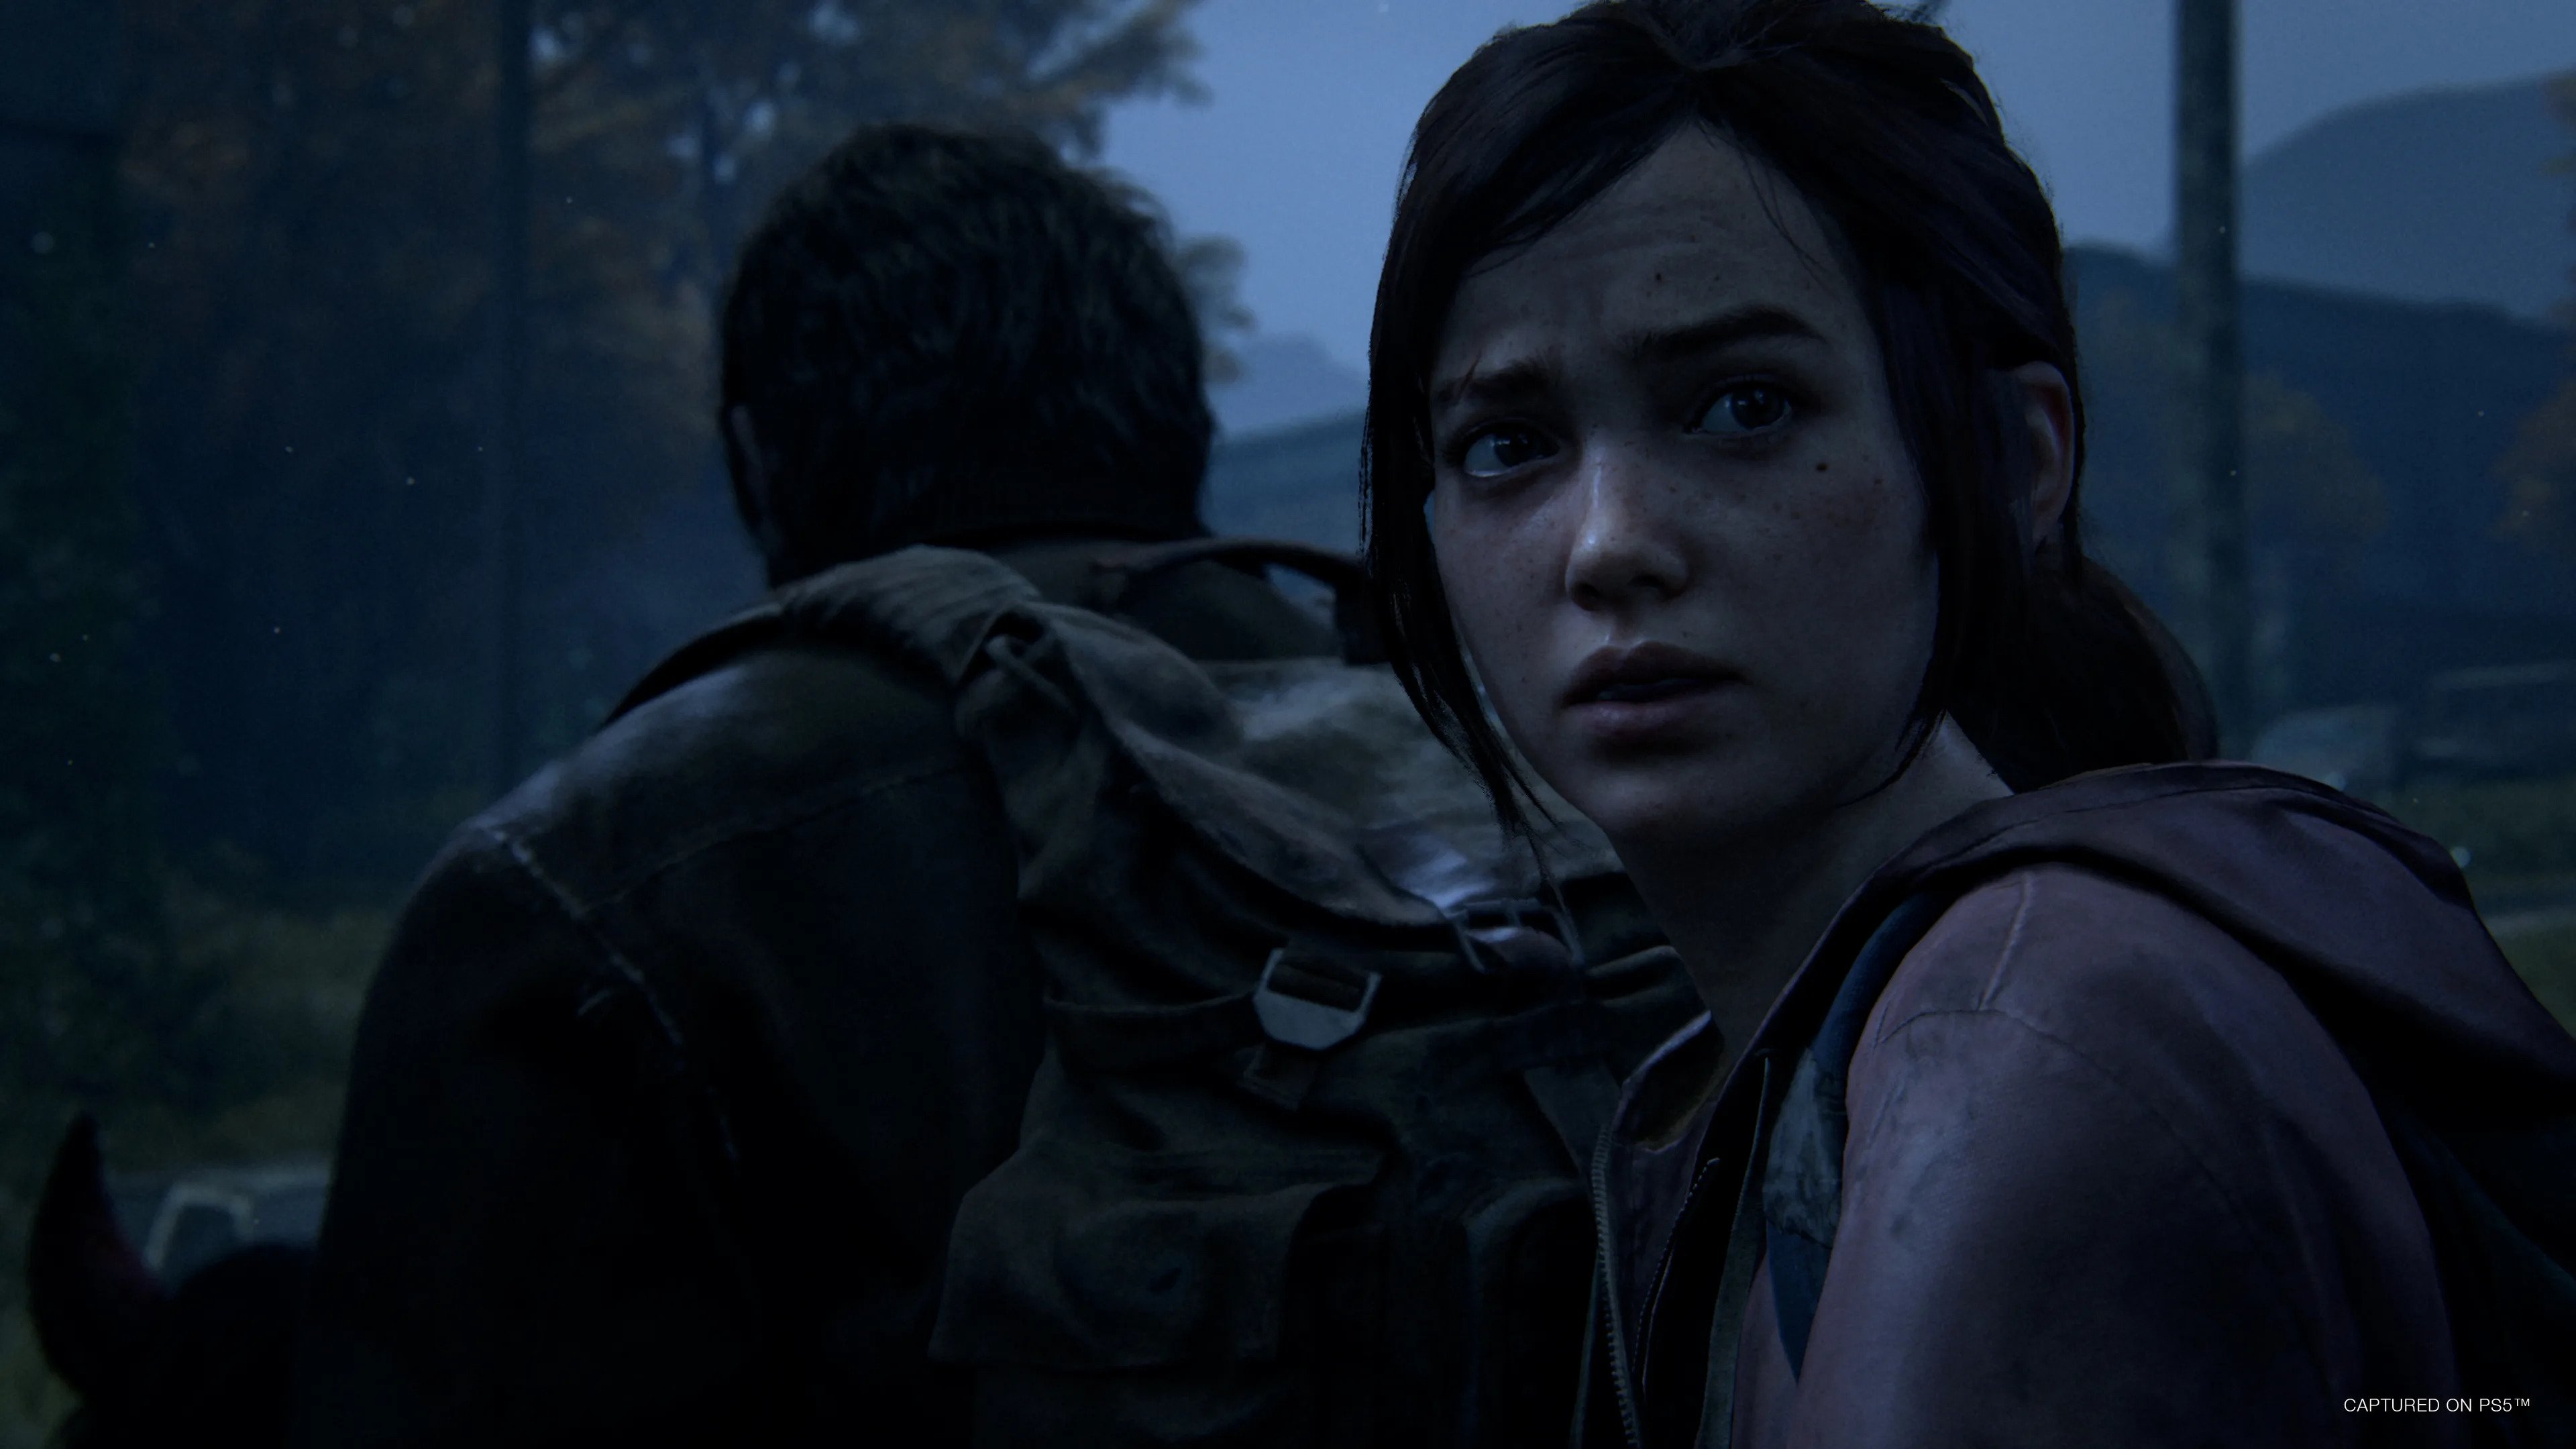 The Last of Us Part 1 remake will come to PC 'very soon' after PS5,  developer says